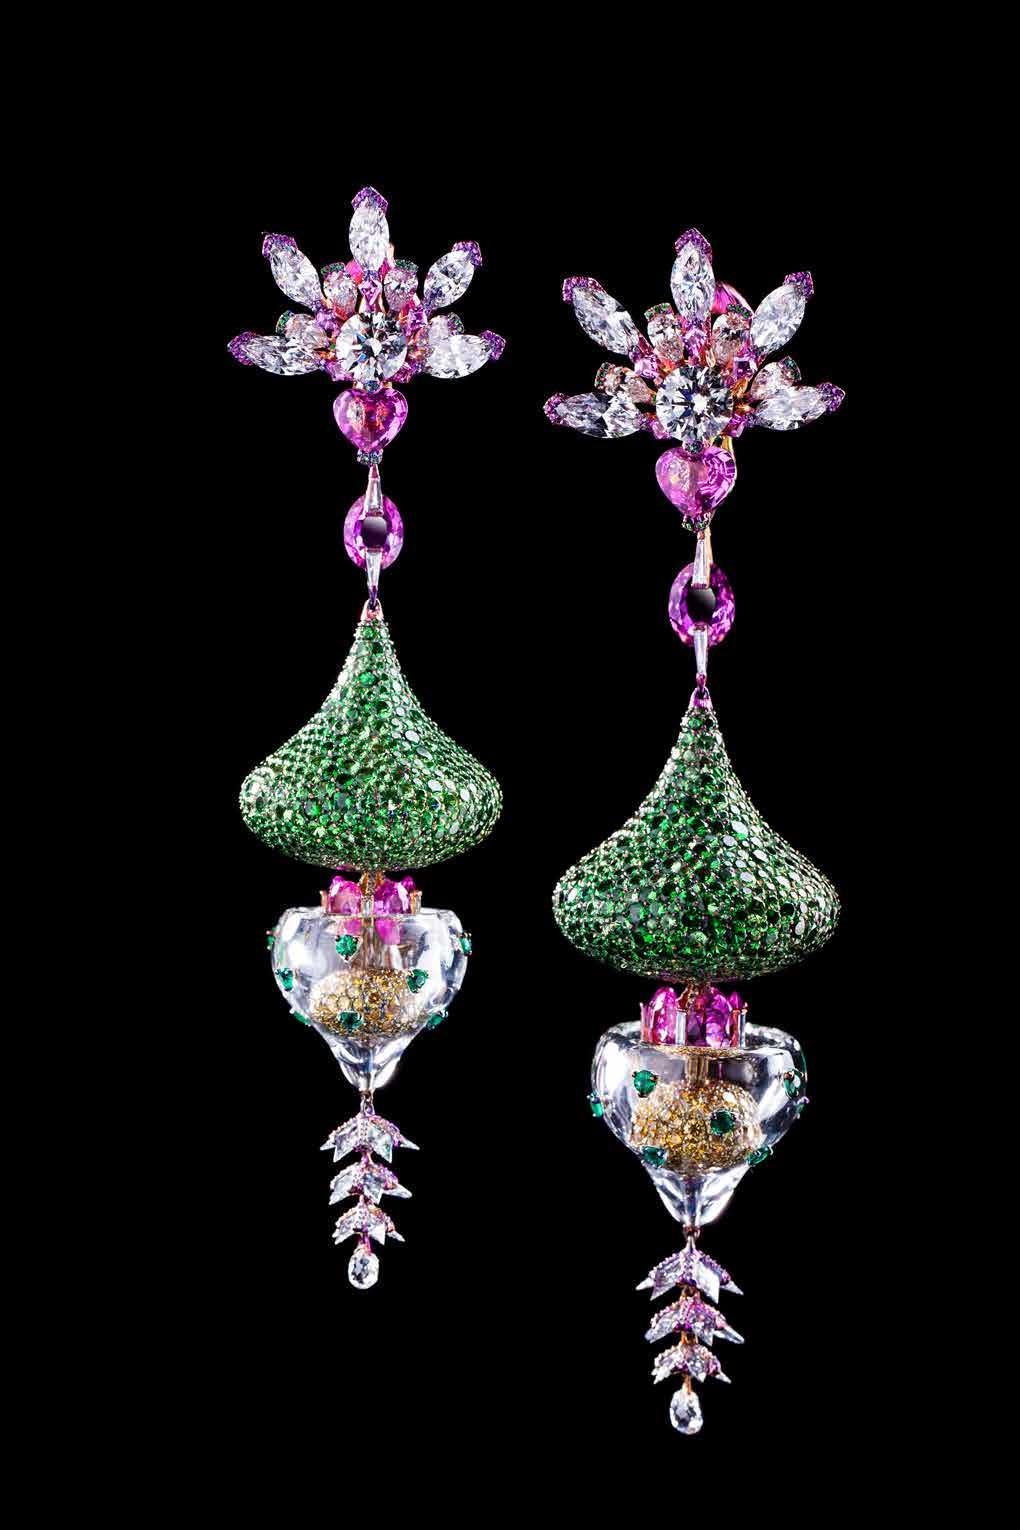 www.wallace-chan.com Wonders of Life Earrings set with 2 diamonds (4.02cts), 2 DIF diamonds (1.49cts), pink sapphires, emeralds, rock crystal, tsavorite garnets, and titanium. POA.